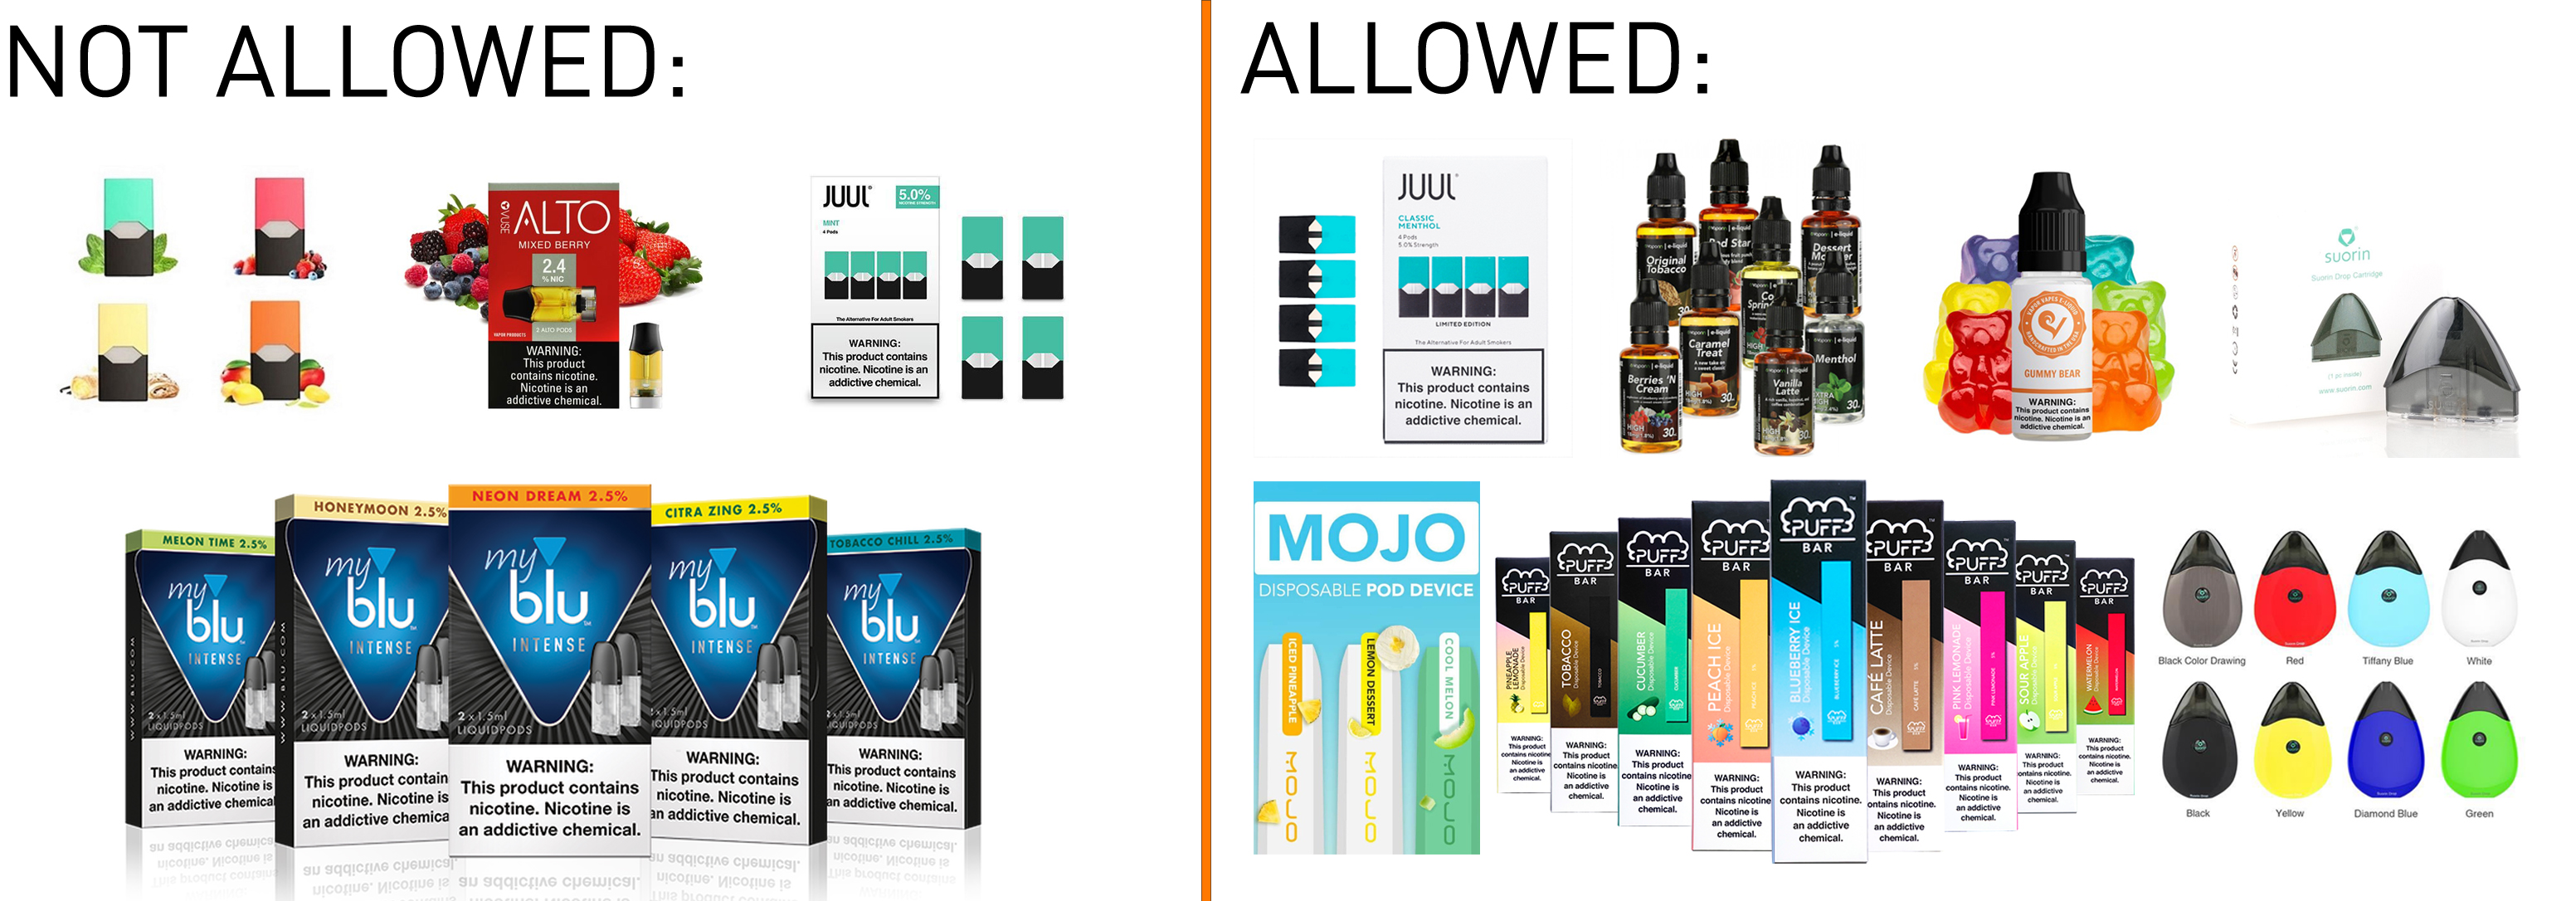 Not allowed products including Blu, Alto, and JUUL mint and fruit flavors as well as allowed products like puff bar, menthol JUUL, Suorin, and refillable vape juices